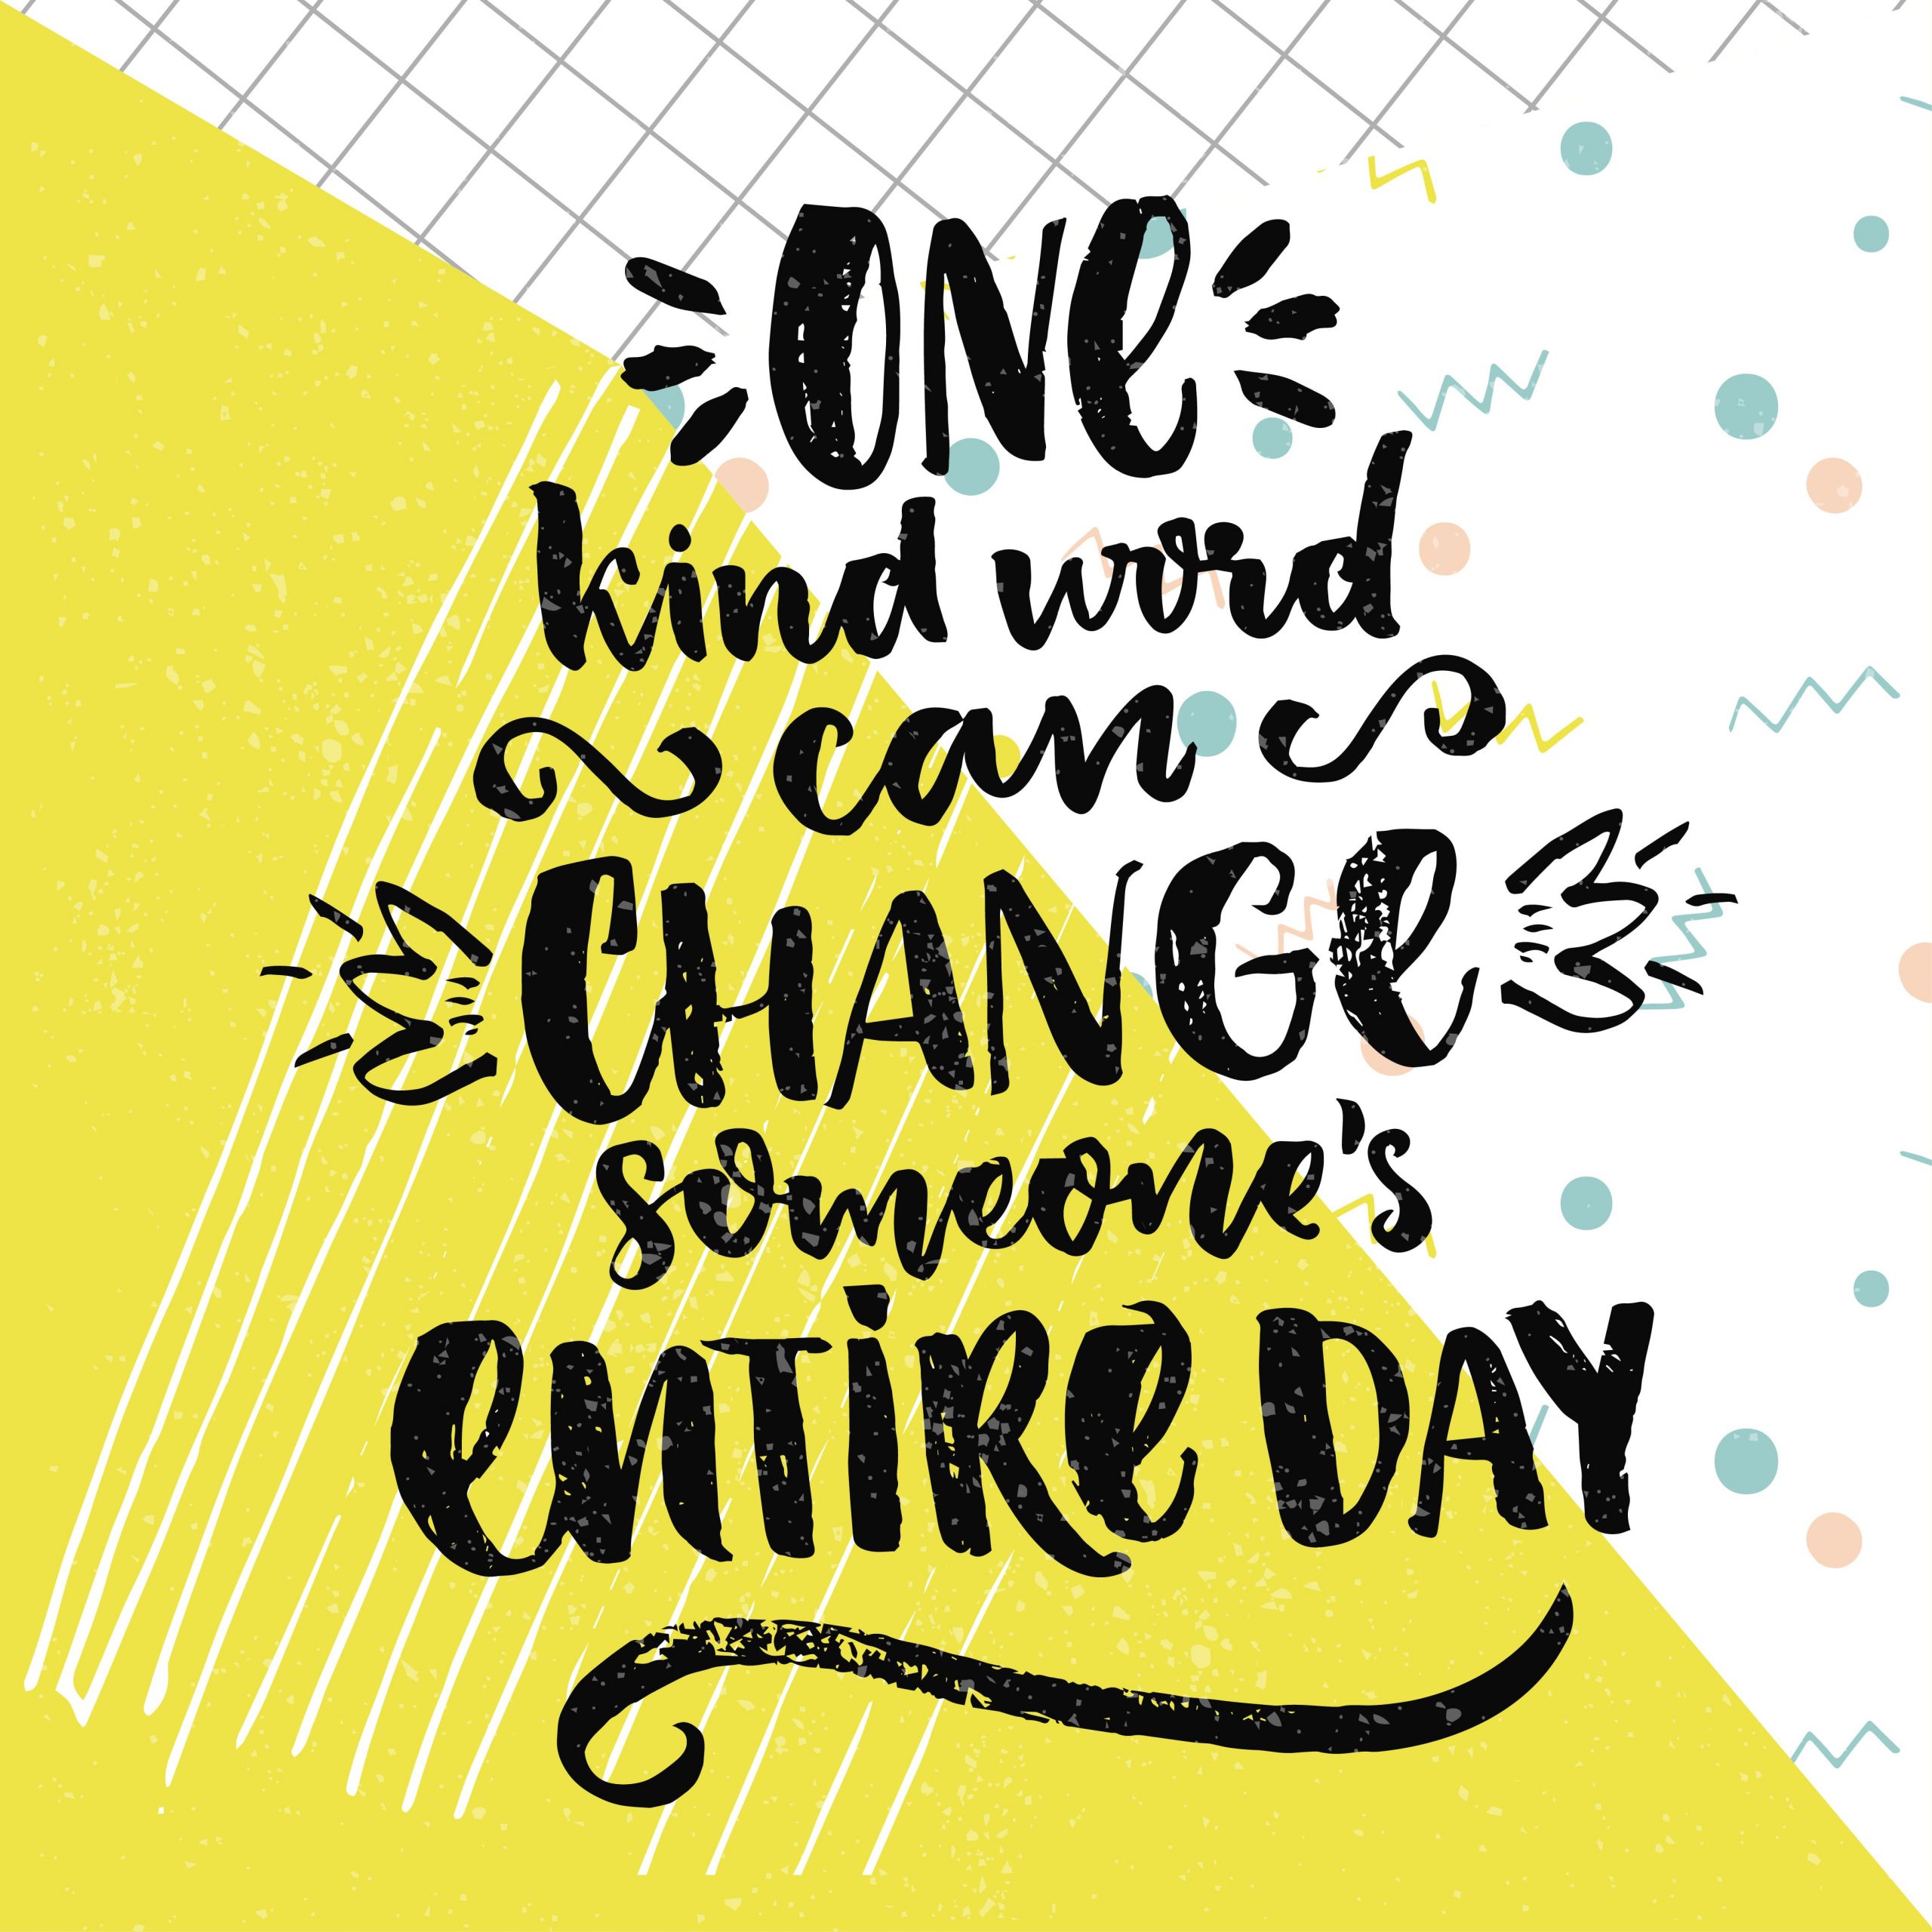 Quotes For Kindness
 How to Spread Kindness on World Kindness Day